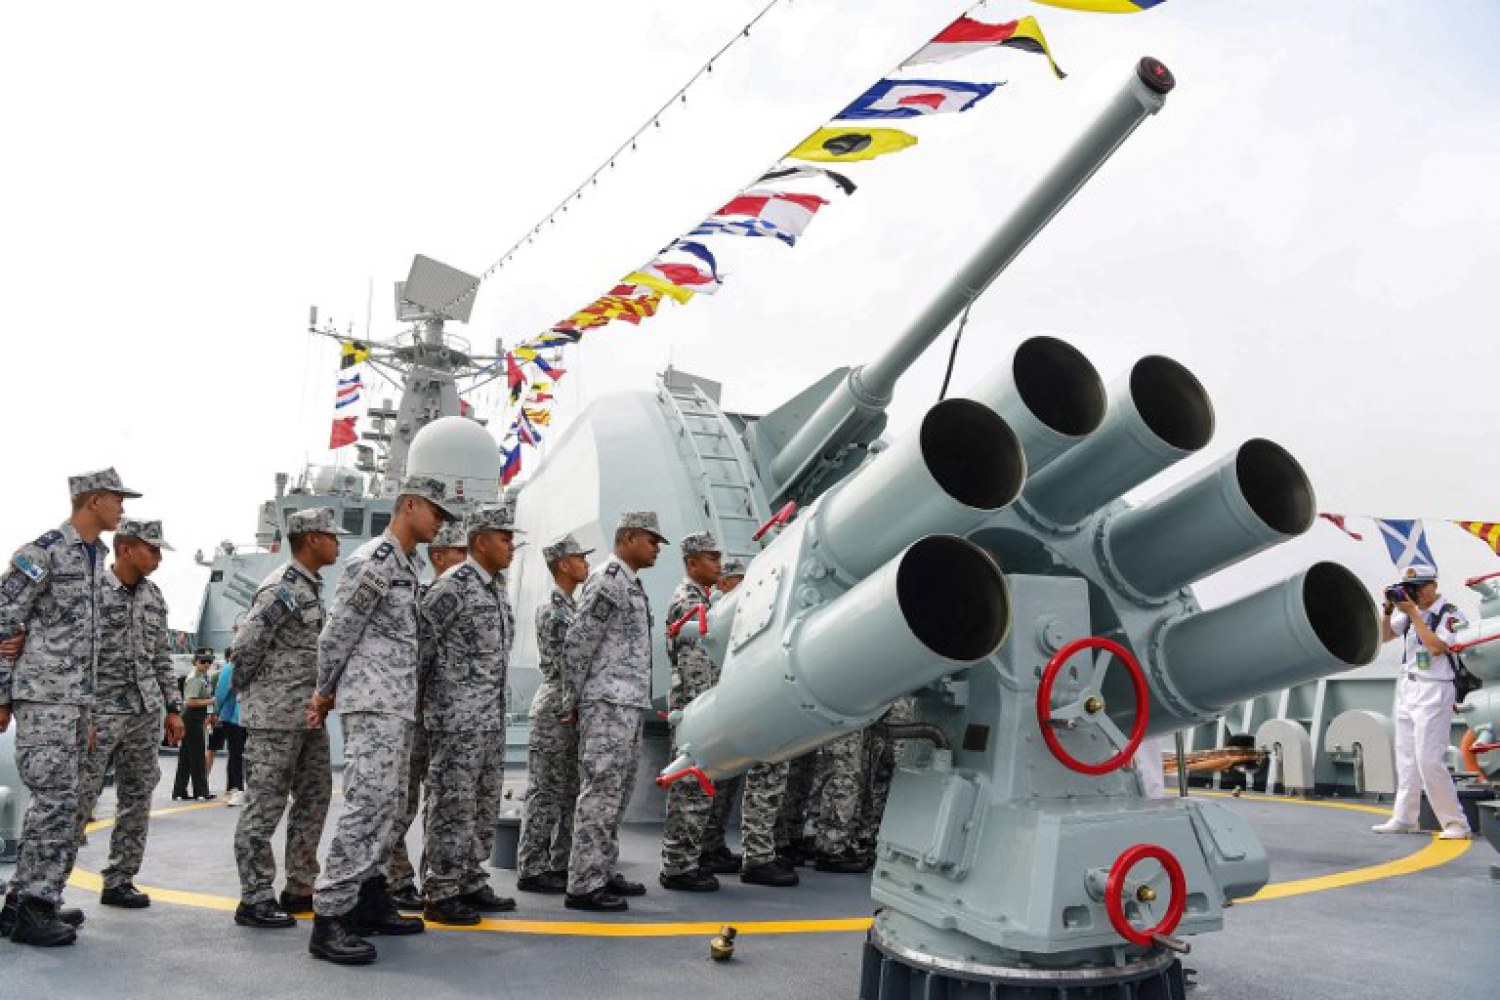 China takes lead in some military tech – Pentagon